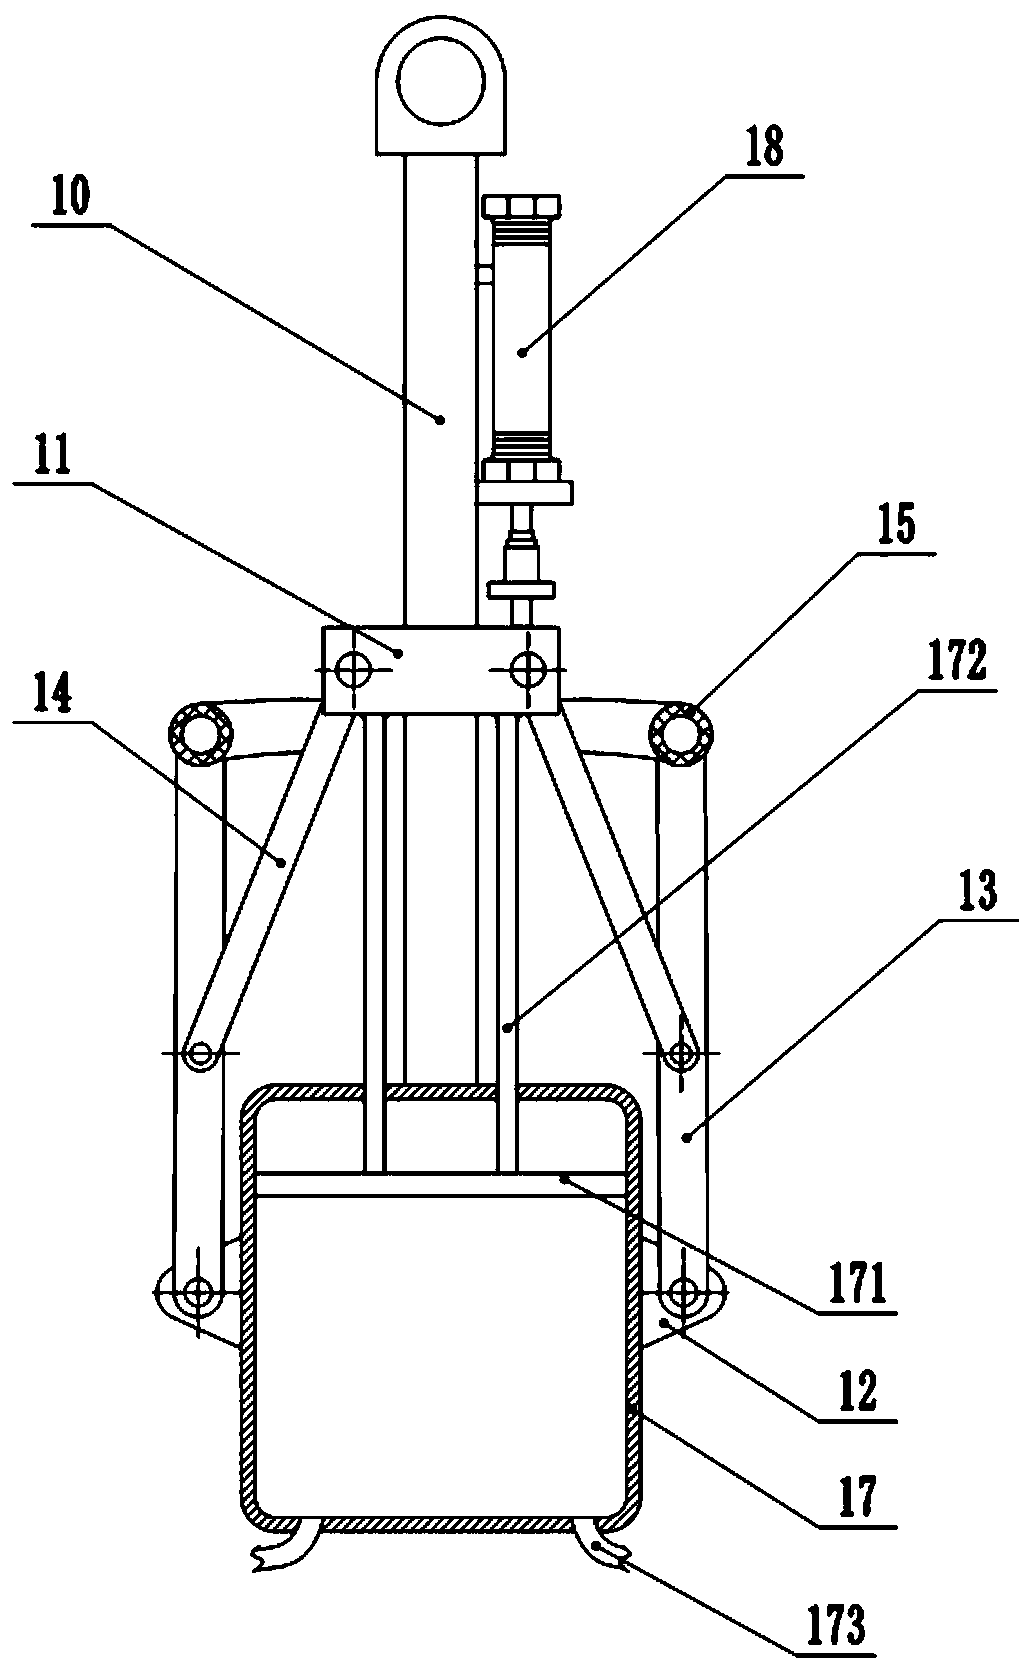 Lifting tool for efficiently loading and unloading tank bodies